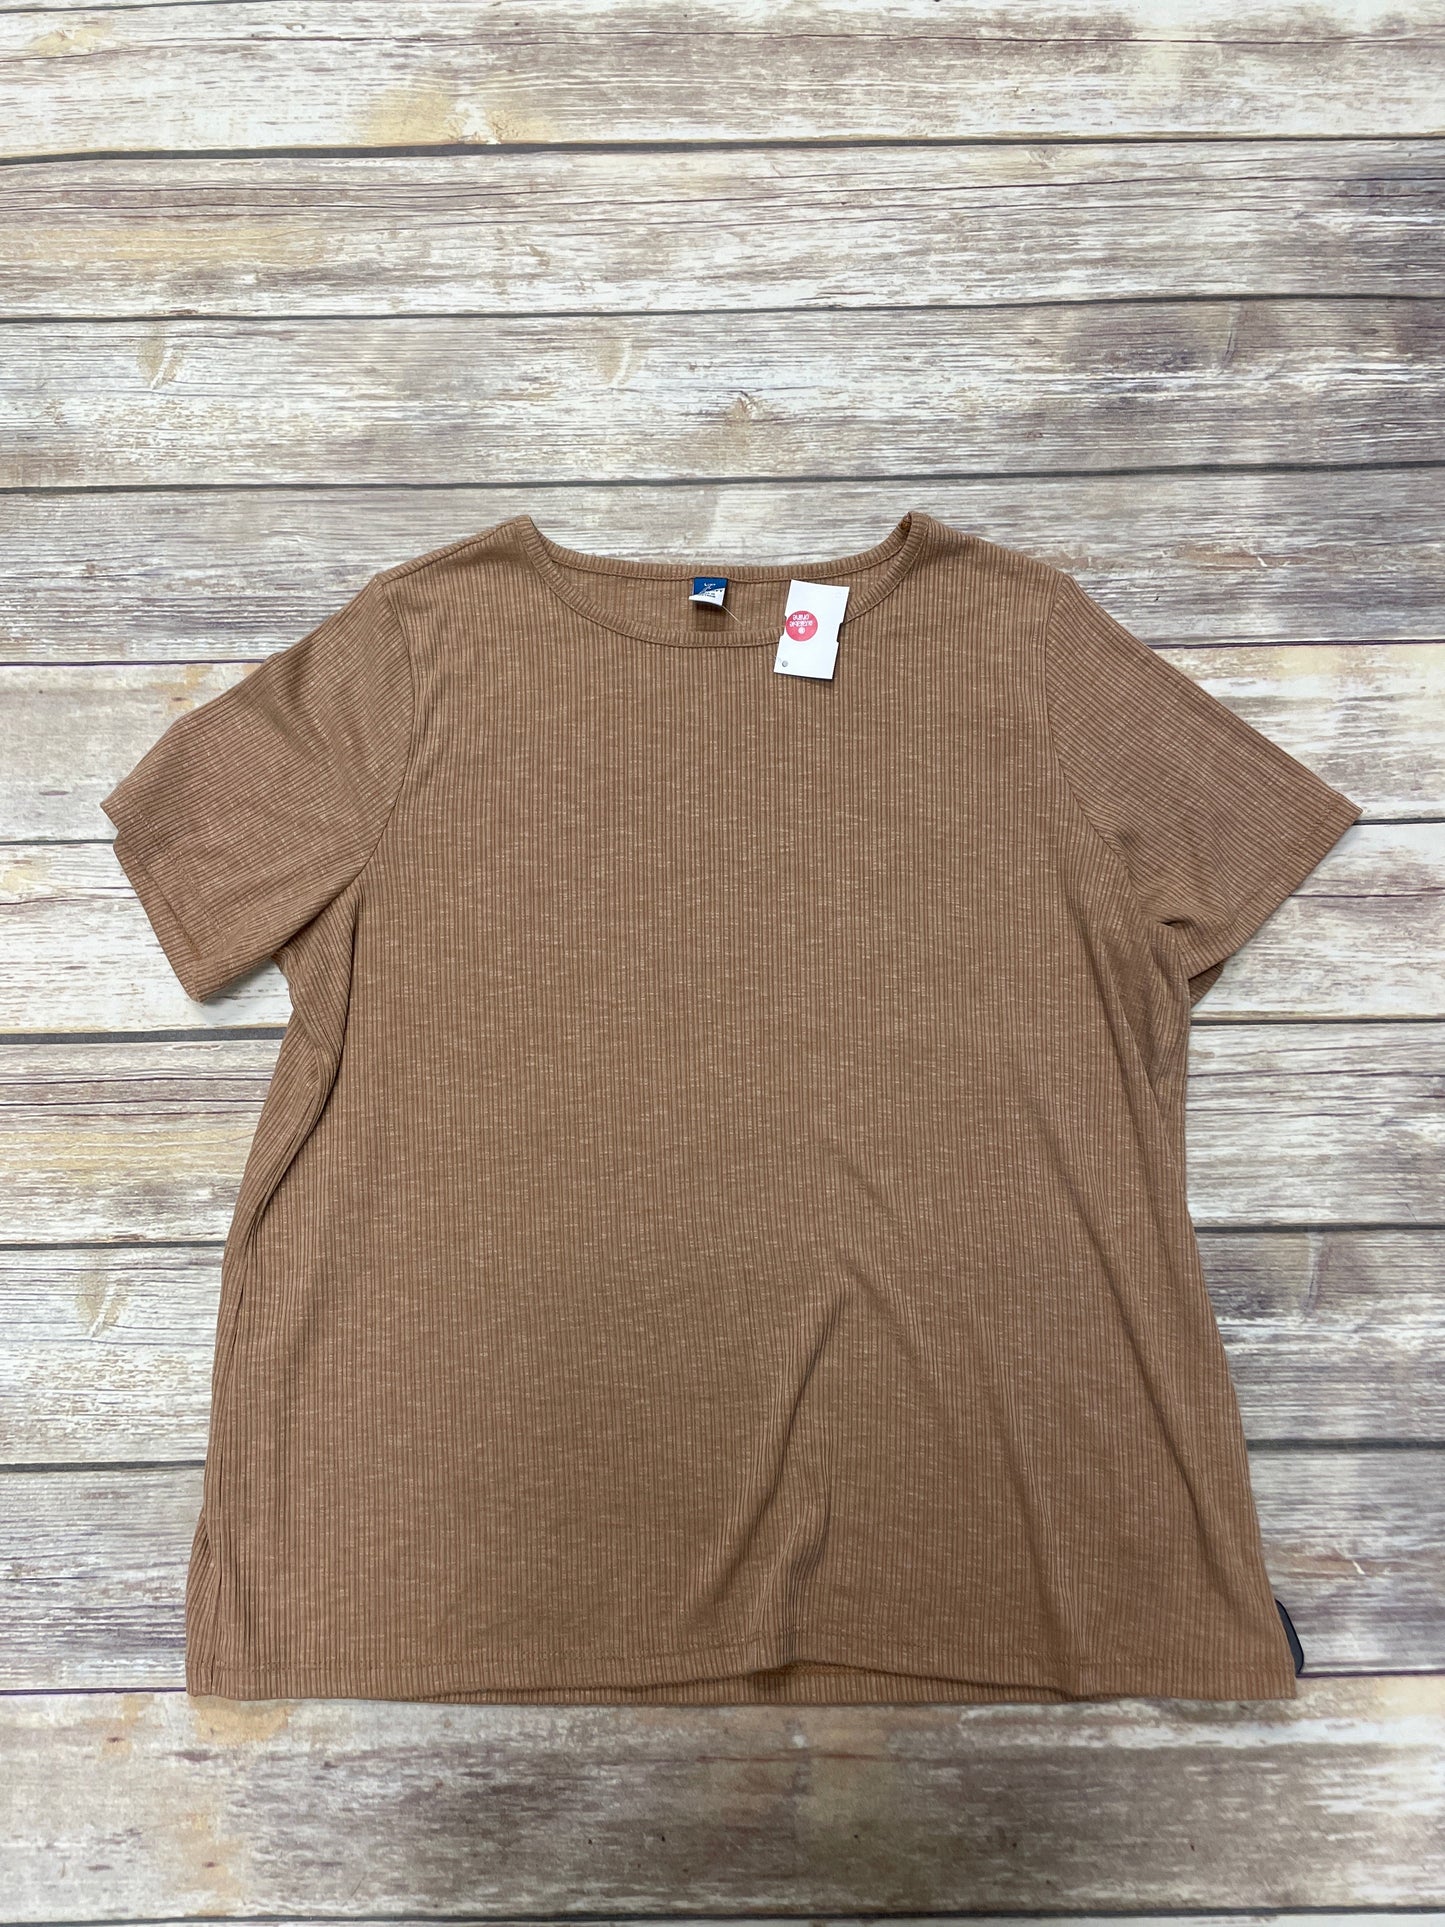 Tan Top Short Sleeve Old Navy, Size L